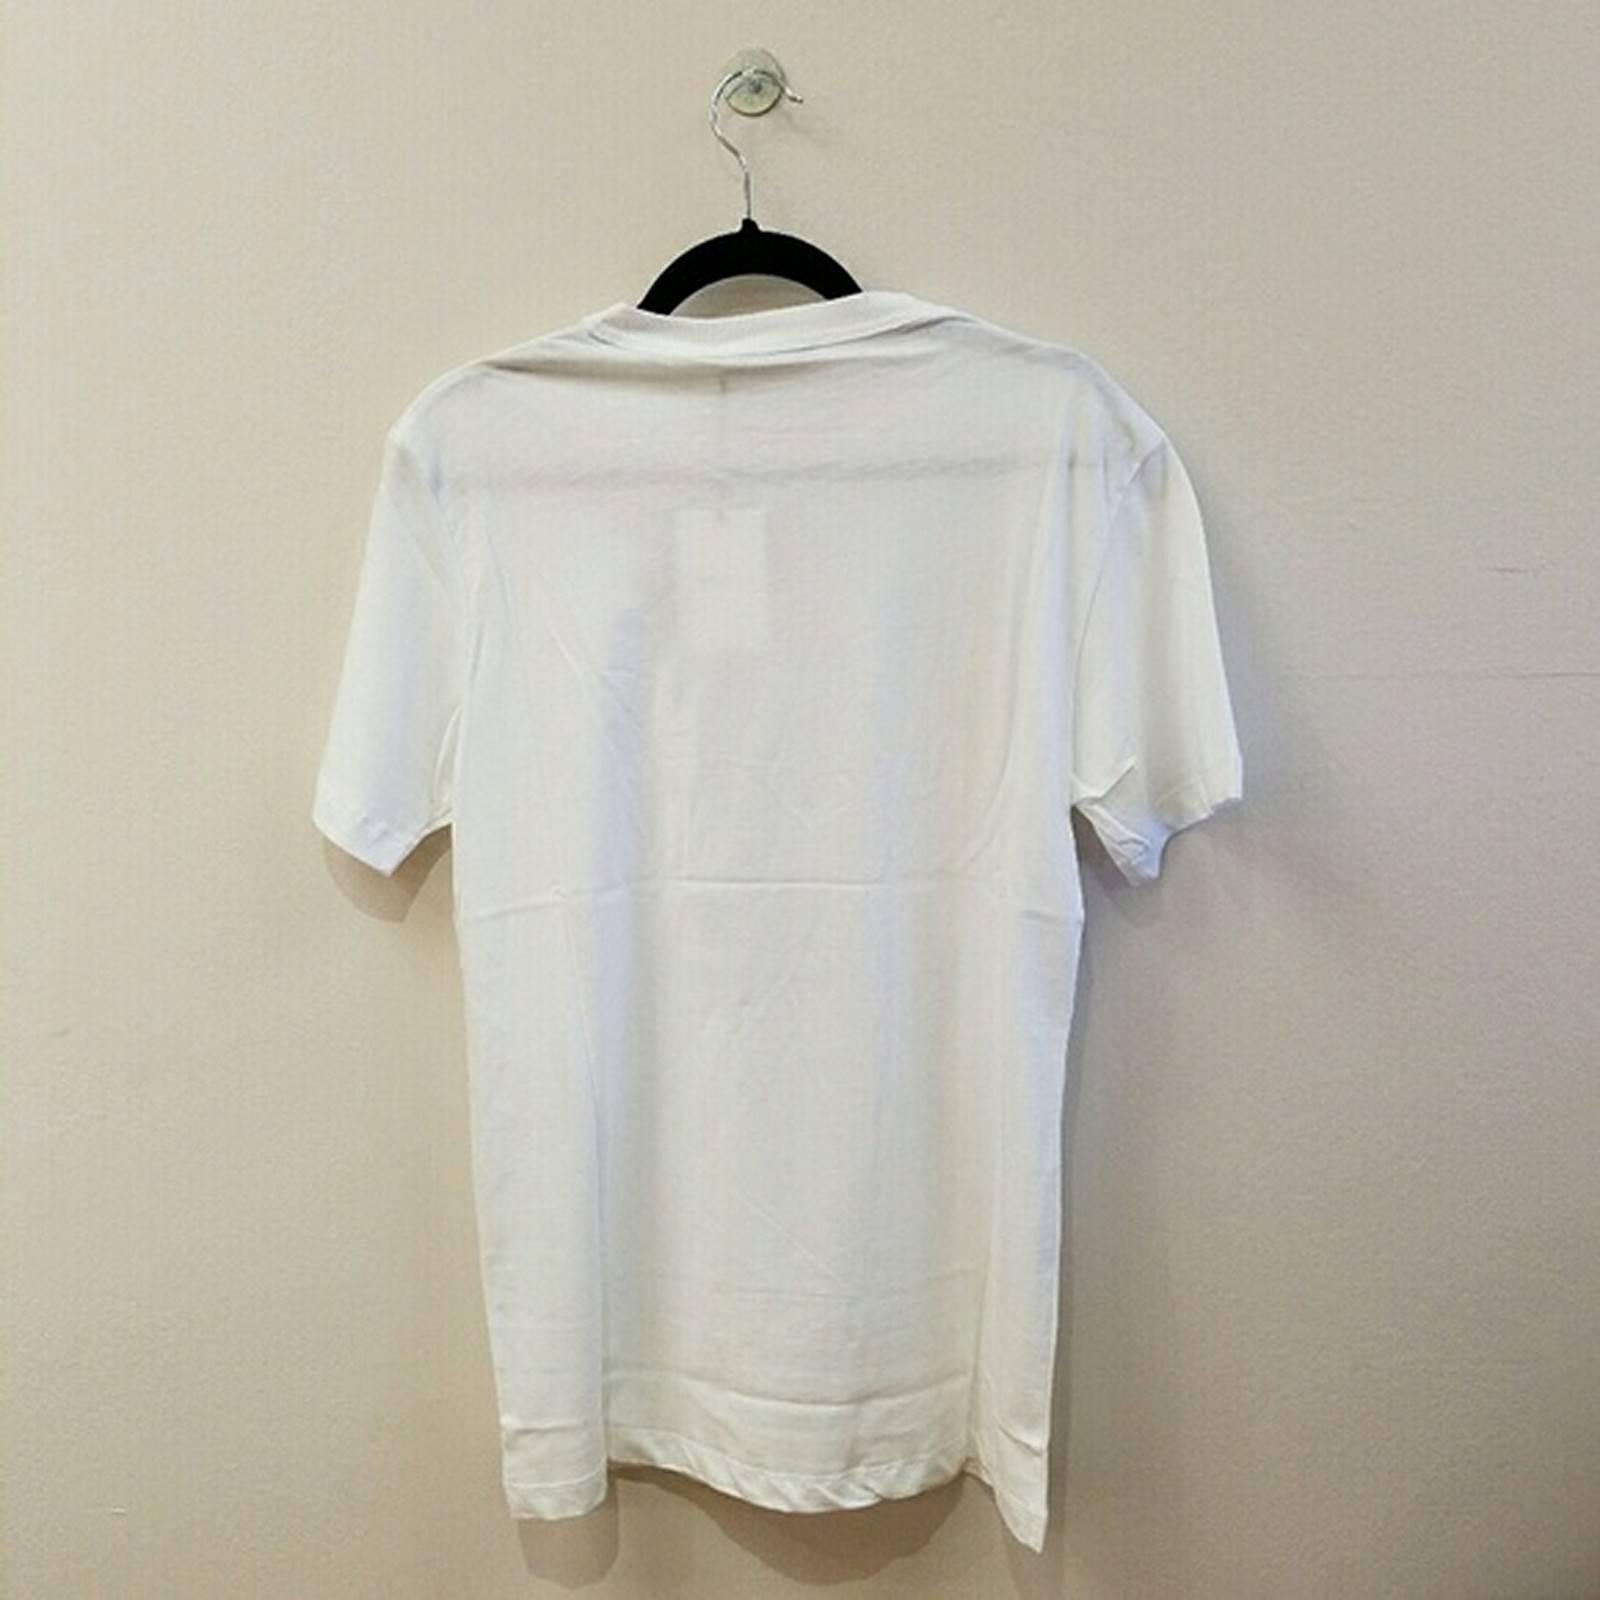 Pierre Balmain Cotton T-shirt White (Medium)

Brand new with tags. Made in Italy.
